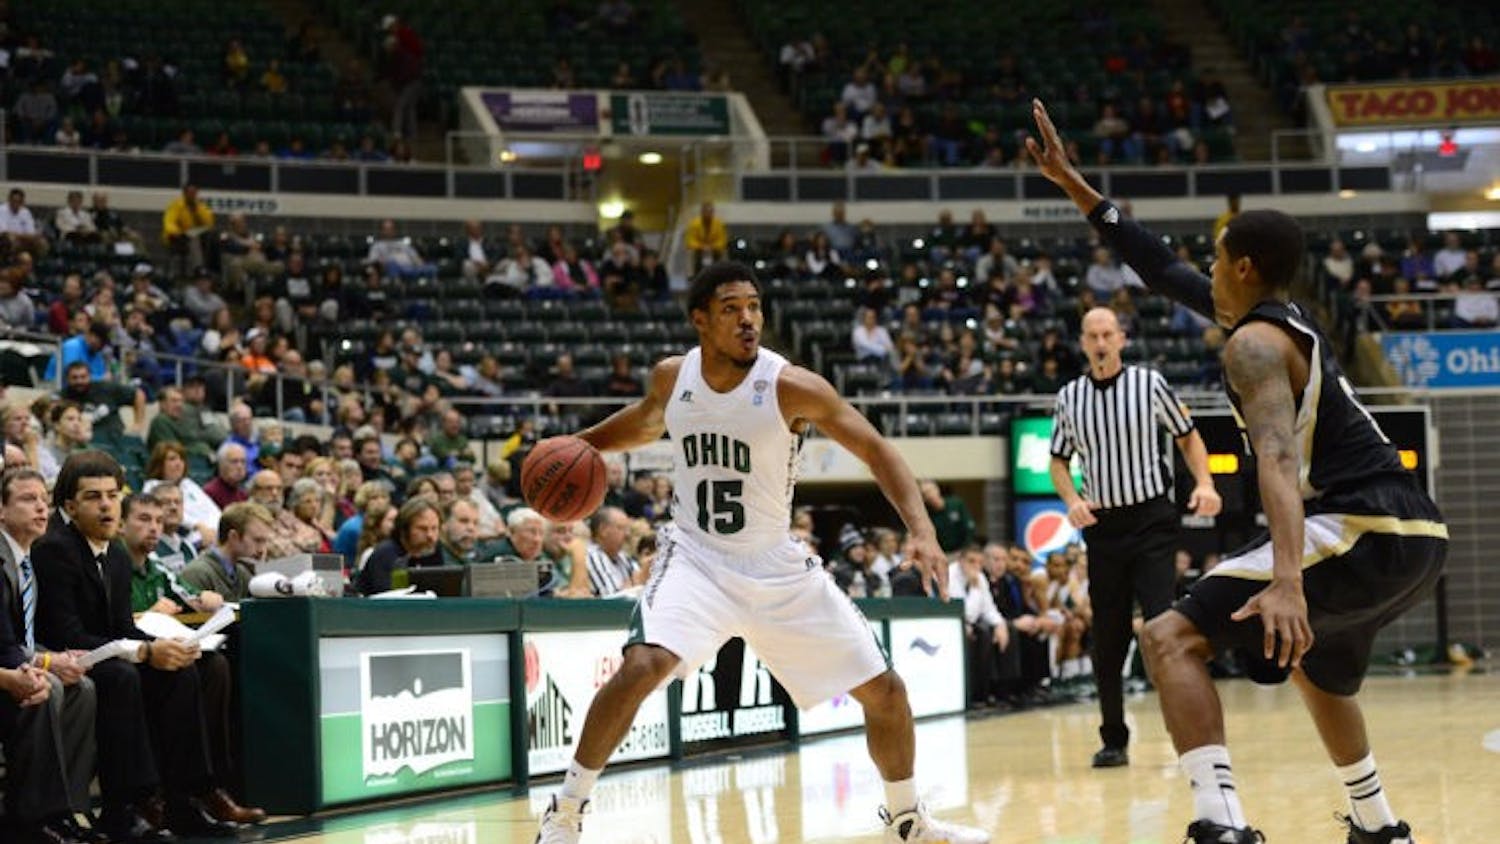 Men's Basketball: Ohio hosts Hampton in last game before holiday  